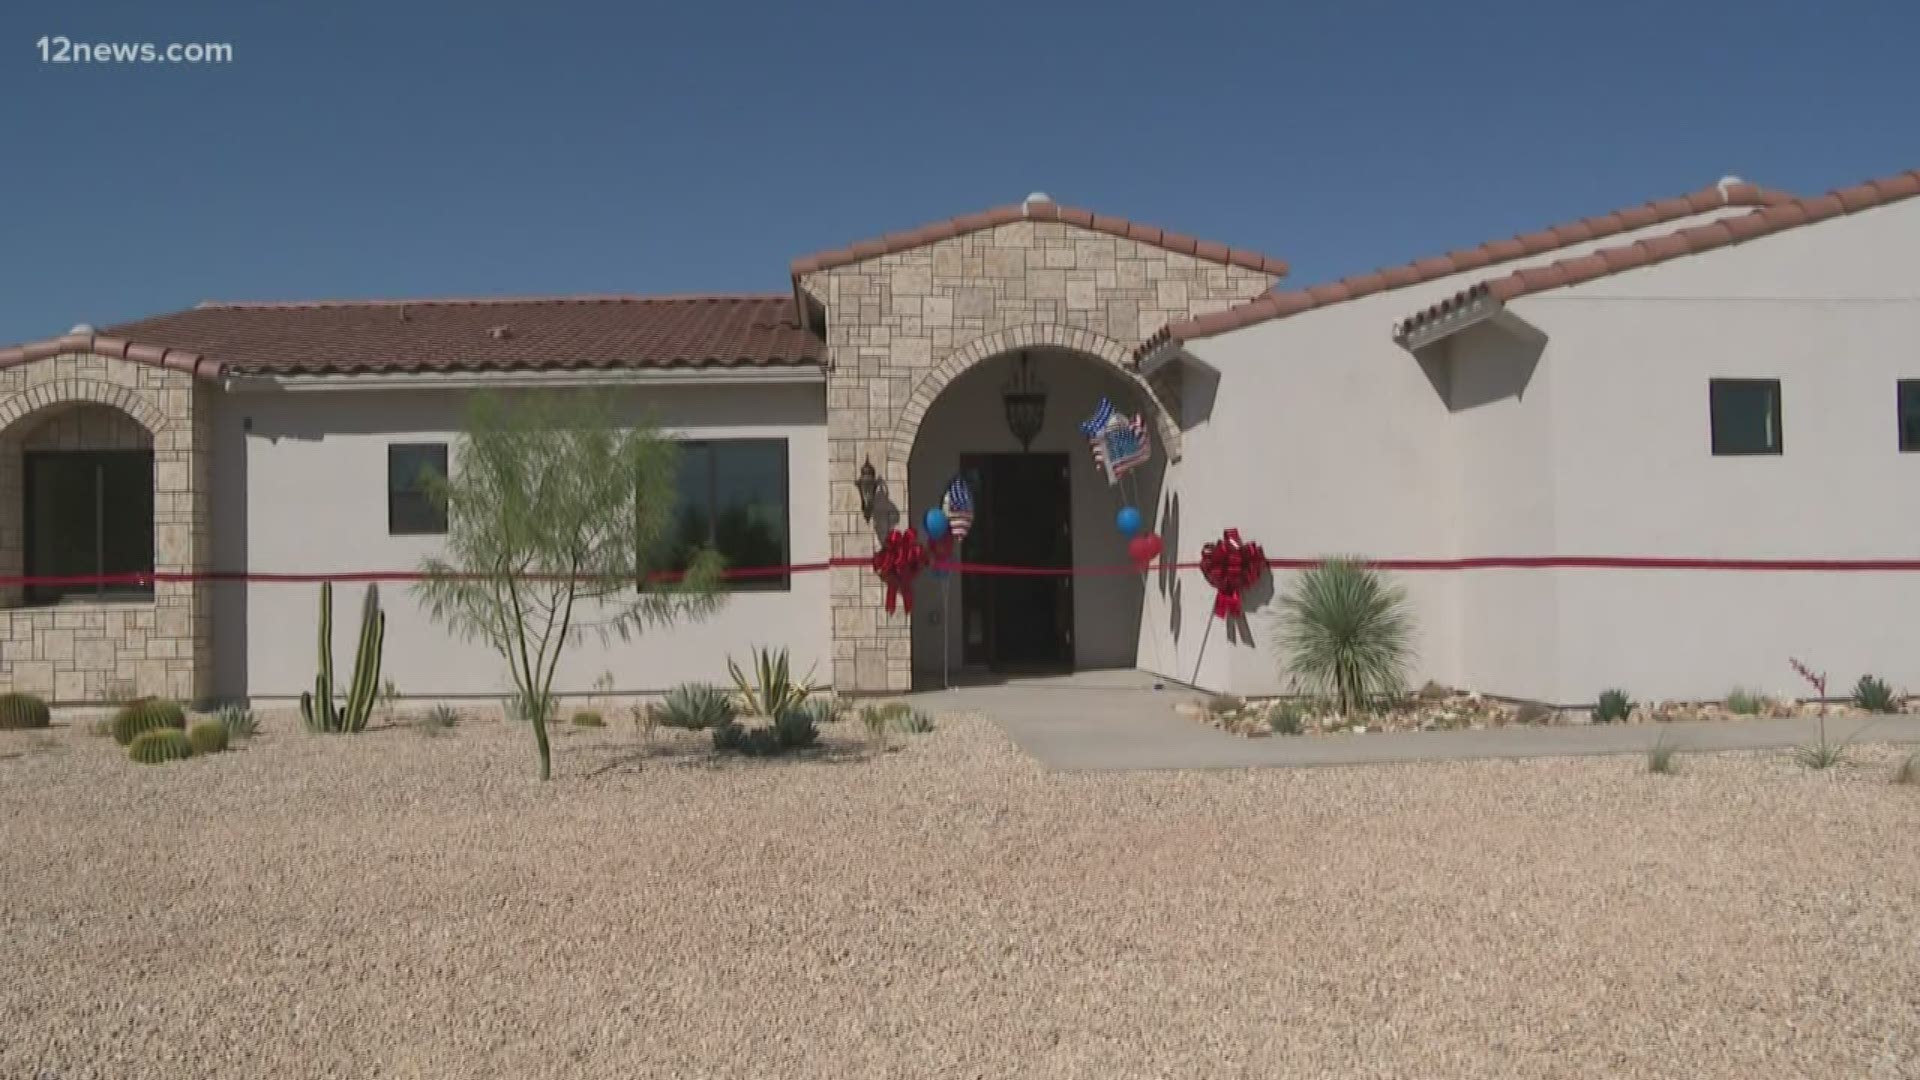 Jared Allen's Wounded Warriors teamed up with the Southwest Region Council of Carpenters to honor Corporal Cesar Garcia's service by building him a custom home.